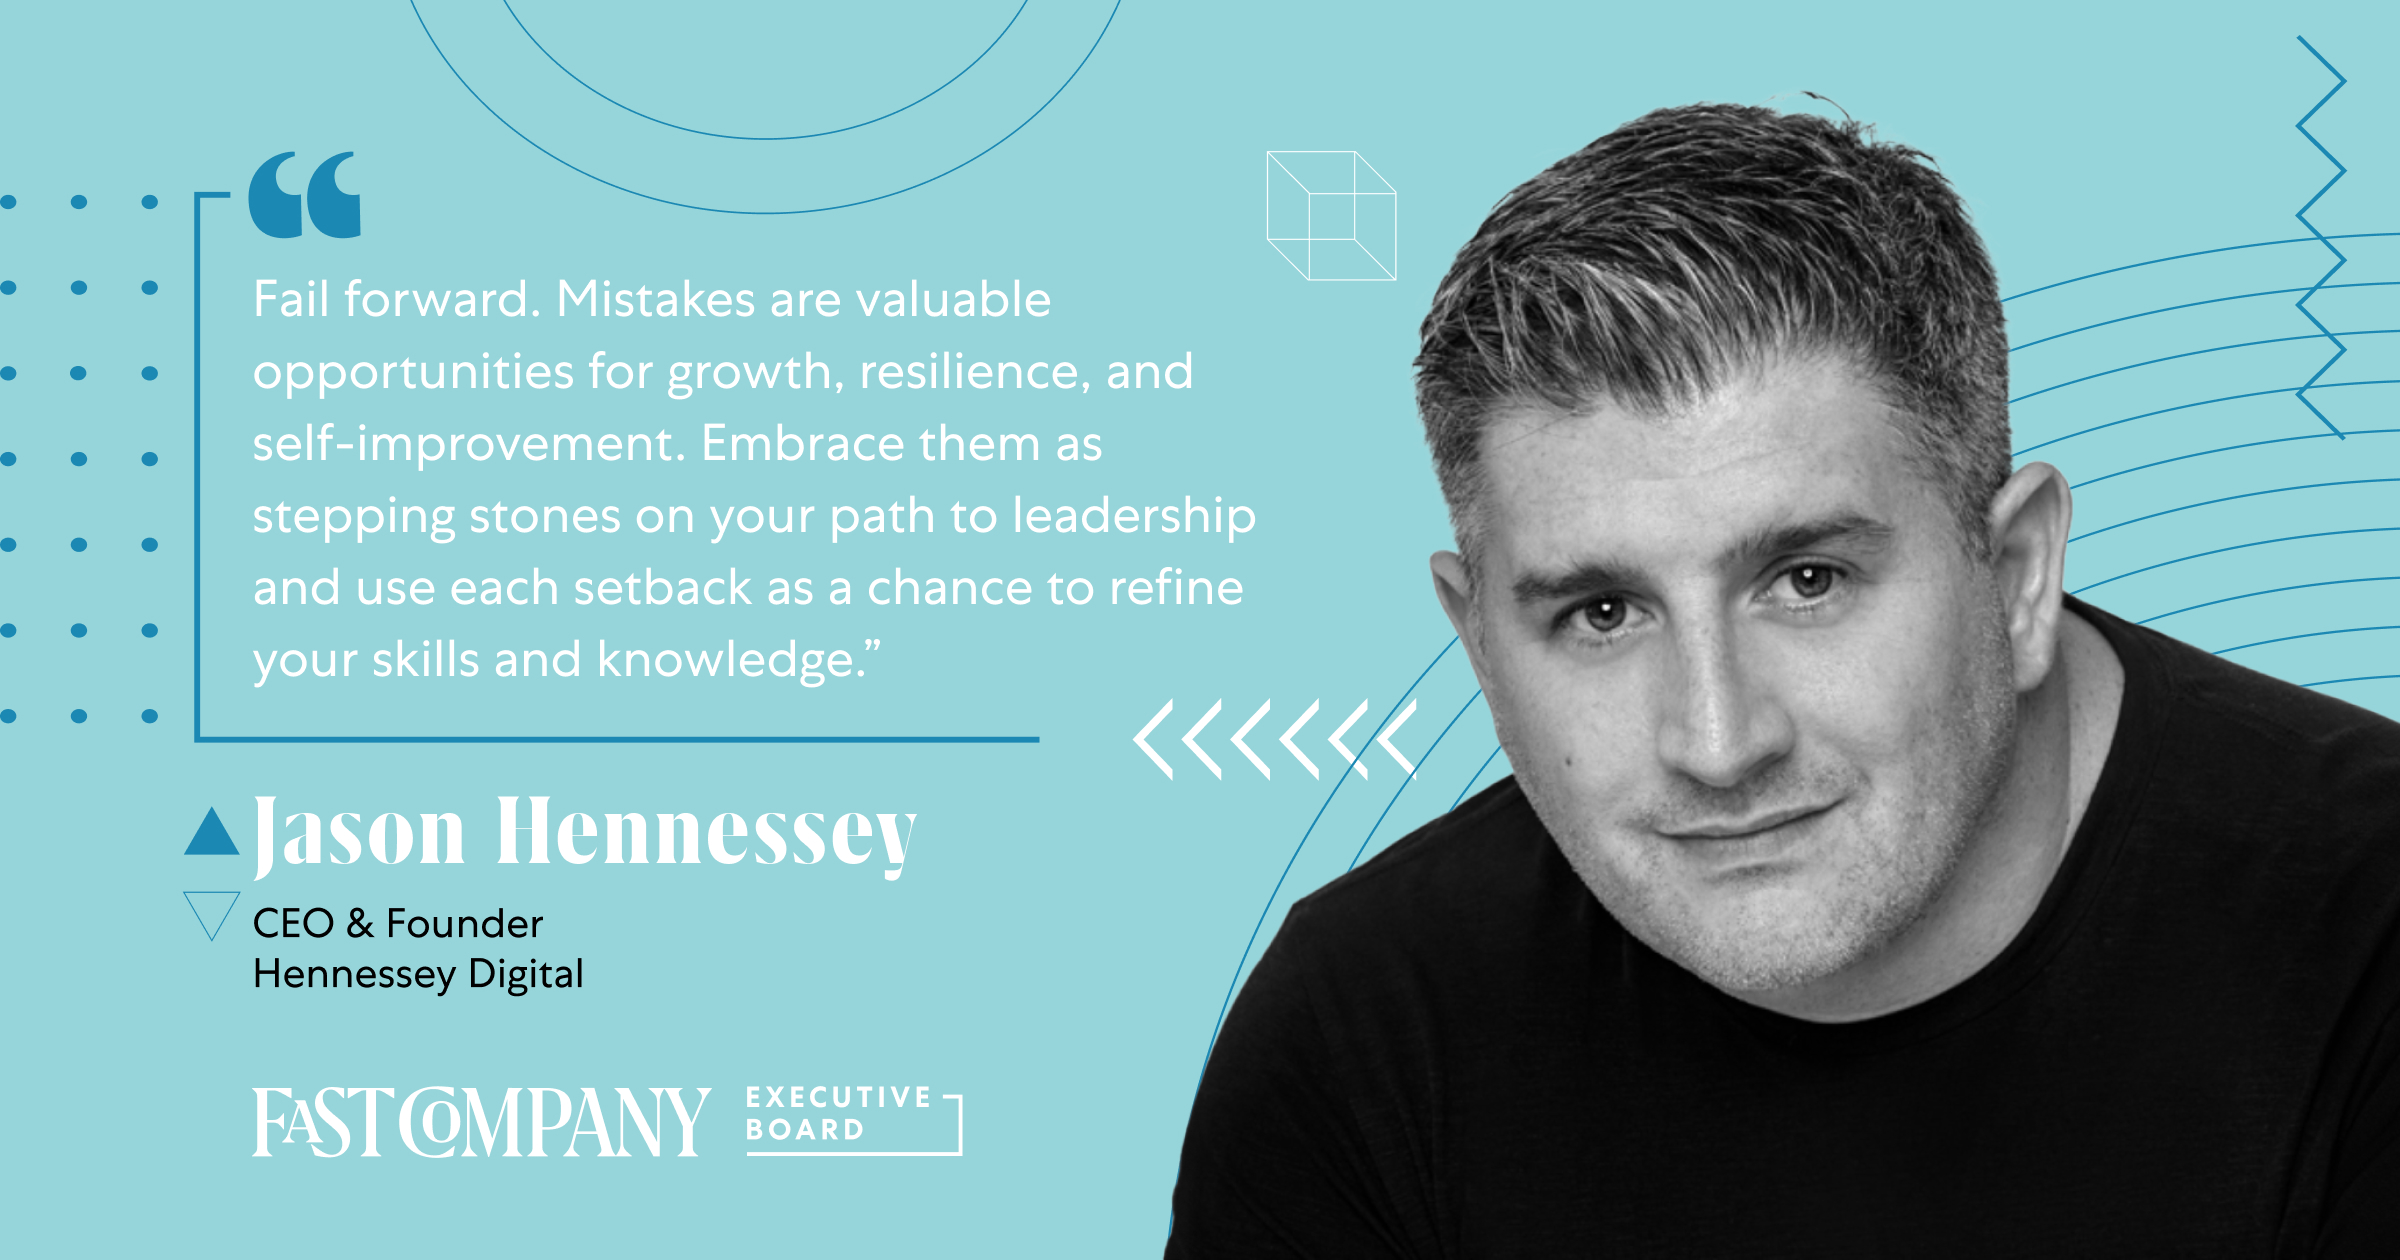 Jason Hennessey, CEO of Hennessey Digital - Visionary leader making waves in the digital marketing industry